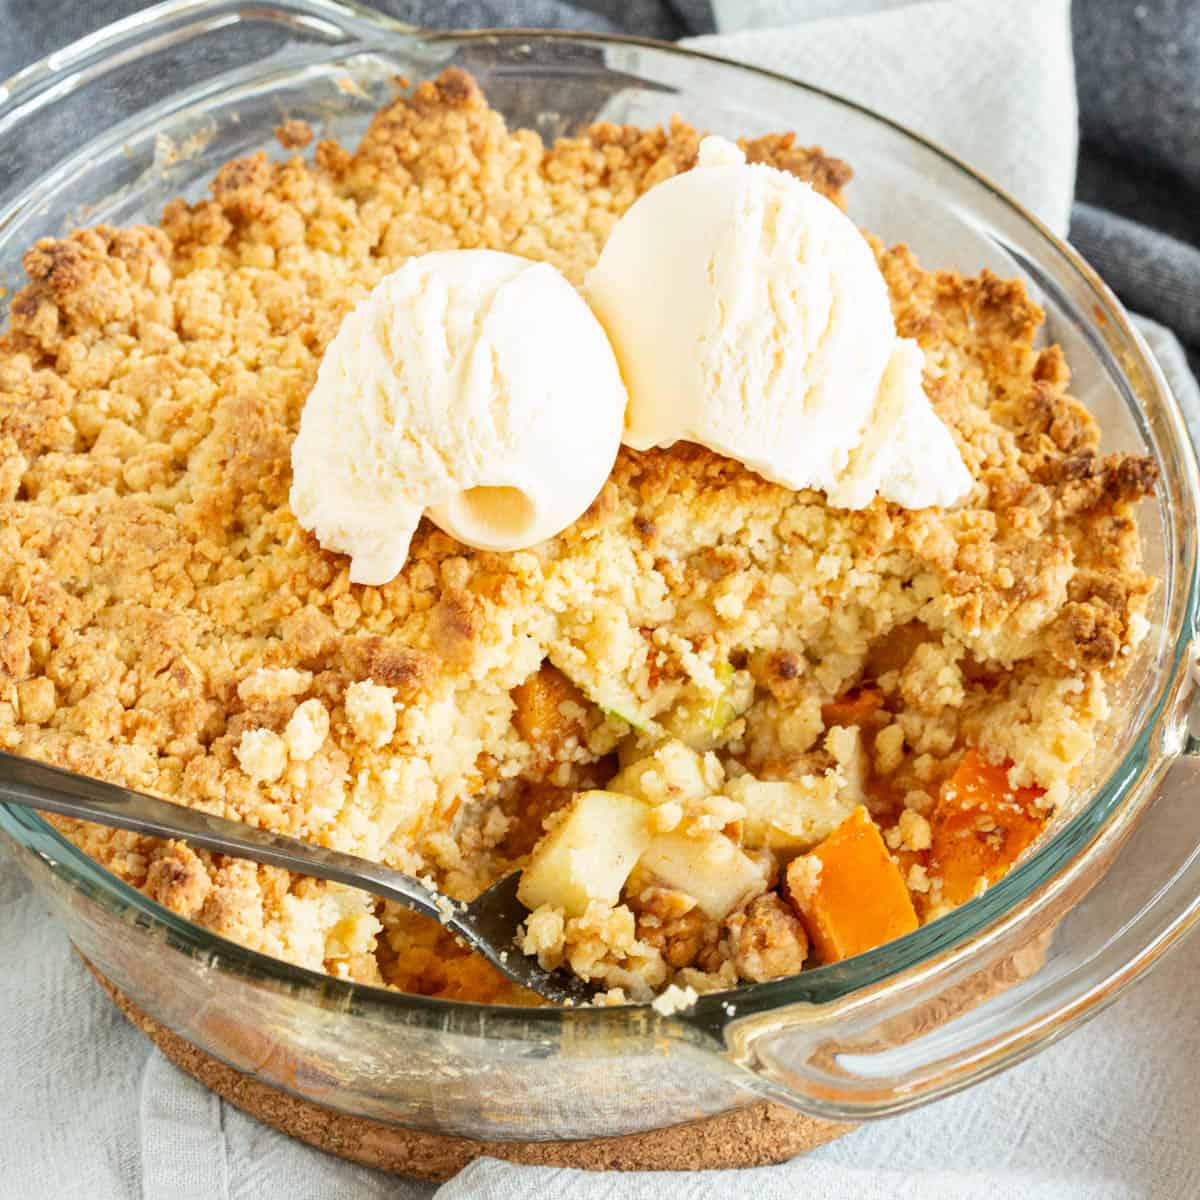 A persimmon crumble pie showing the chunks of apple and persimmon with ice cream.